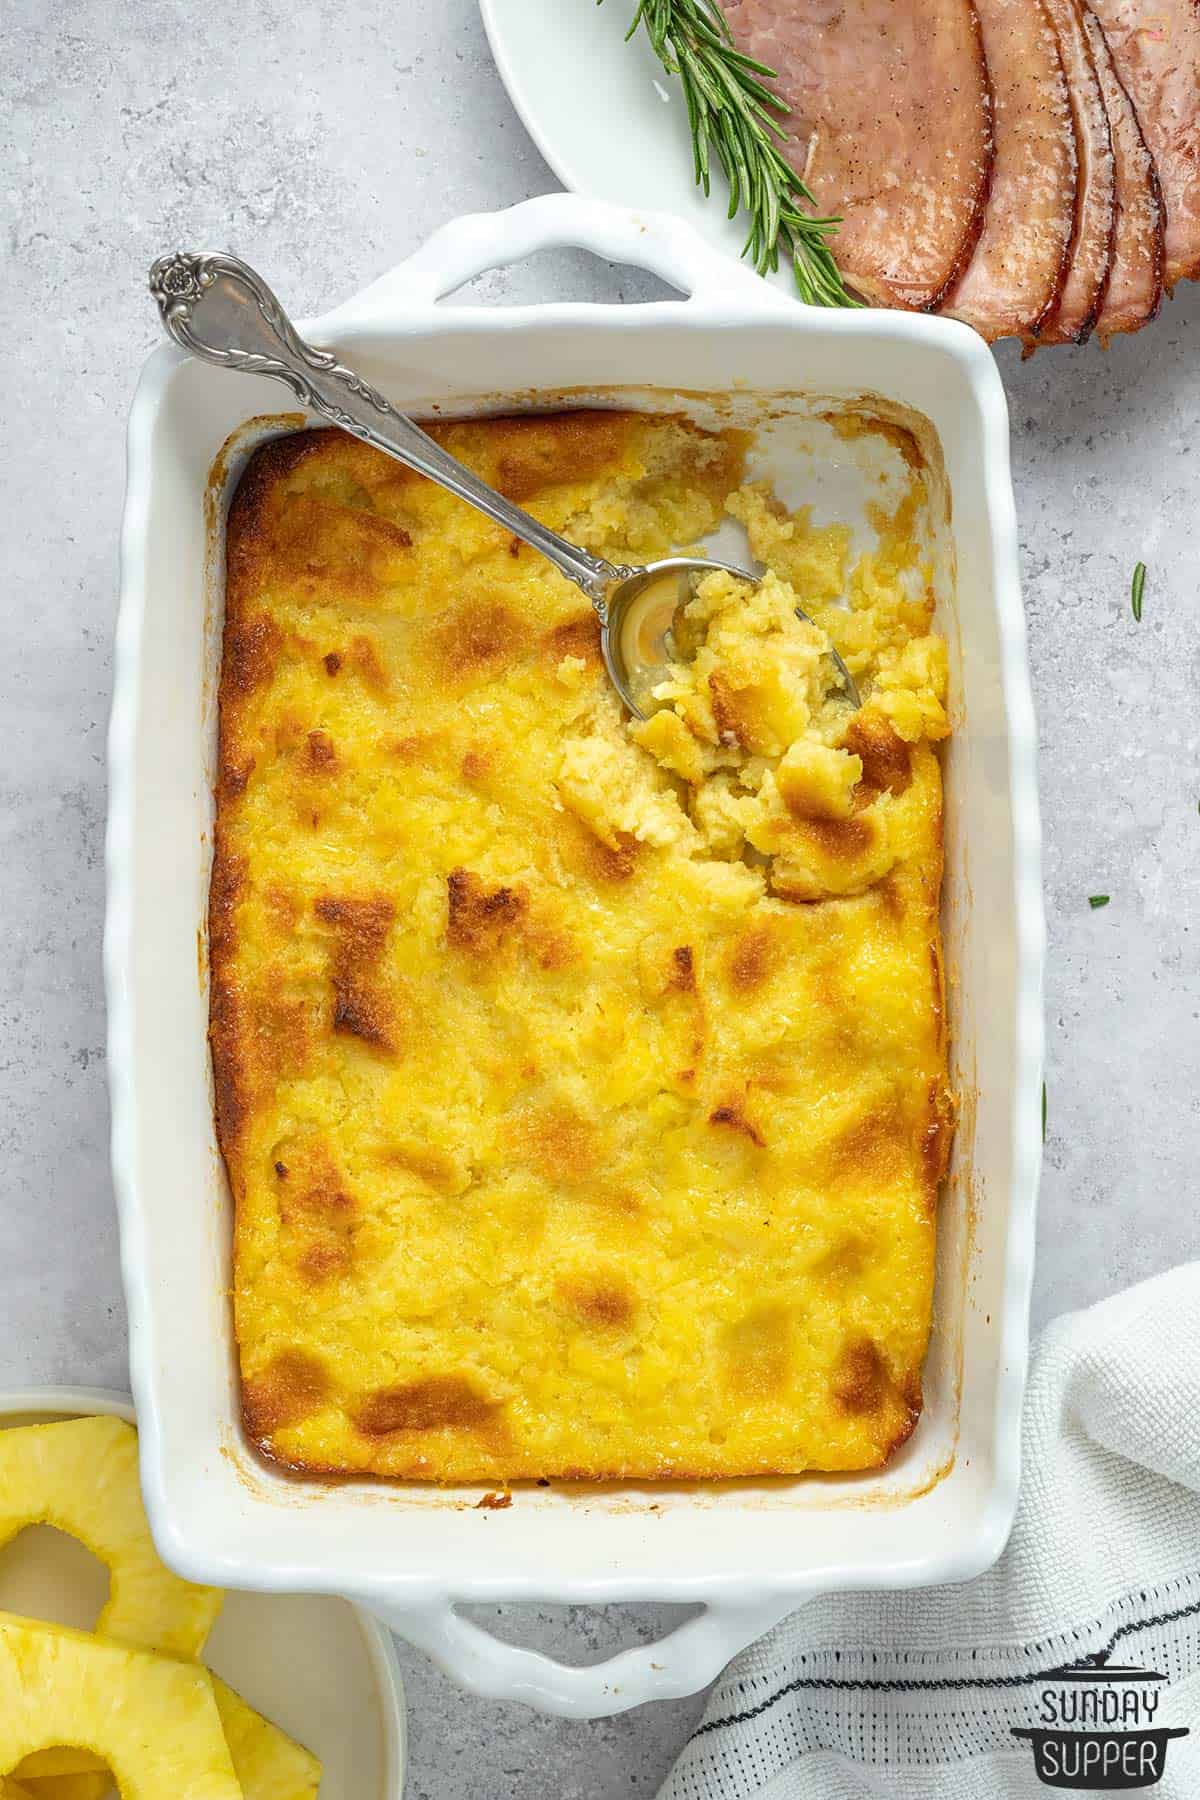 pineapple casserole in a dish with a serving spoon and slices of ham